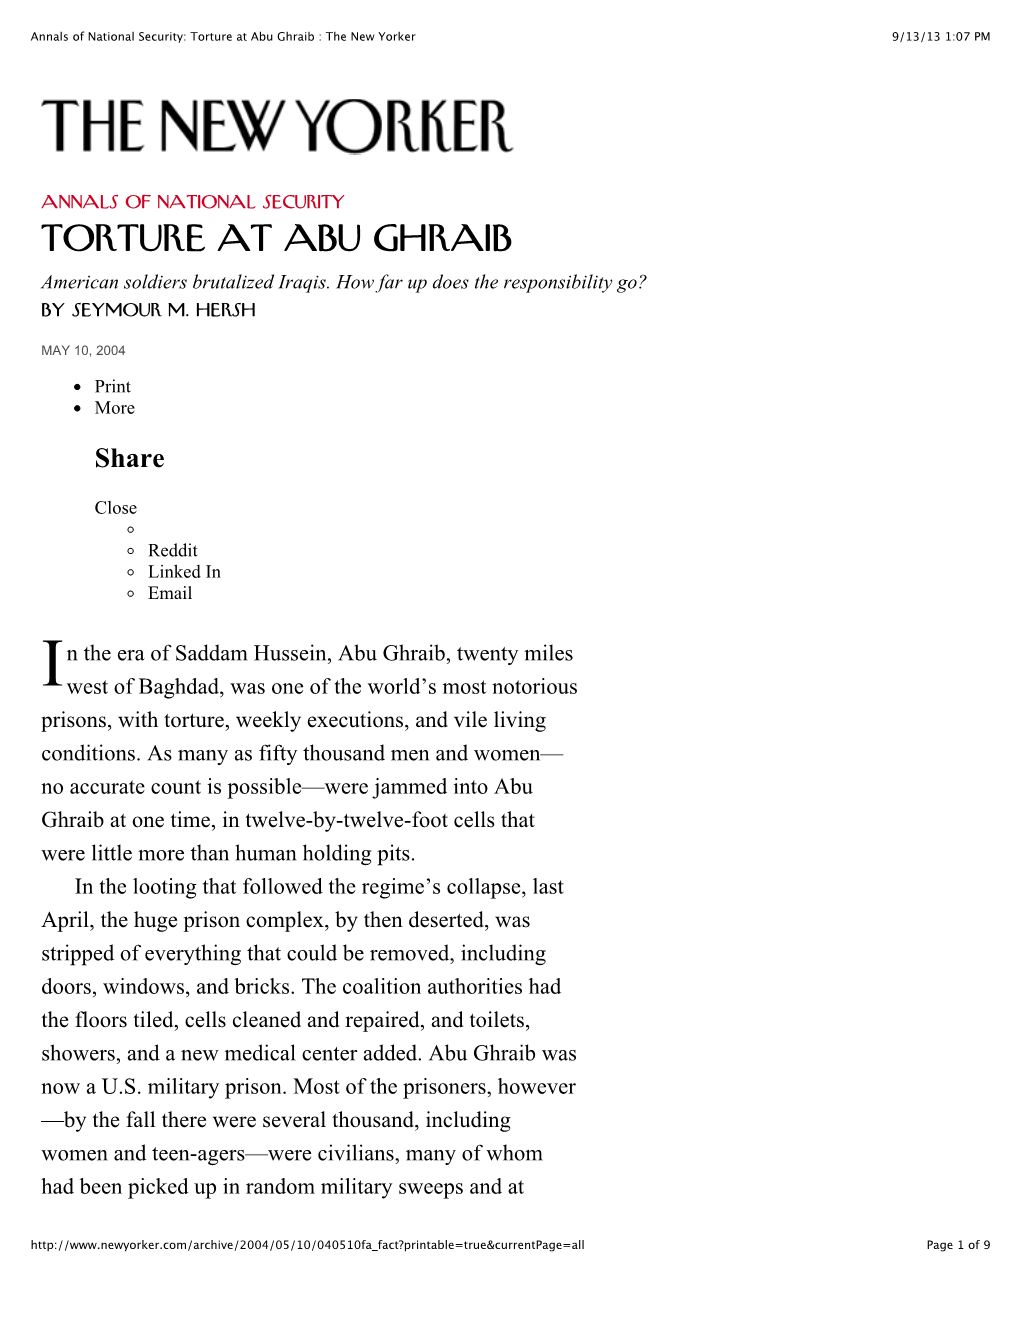 Torture at Abu Ghraib : the New Yorker 9/13/13 1:07 PM